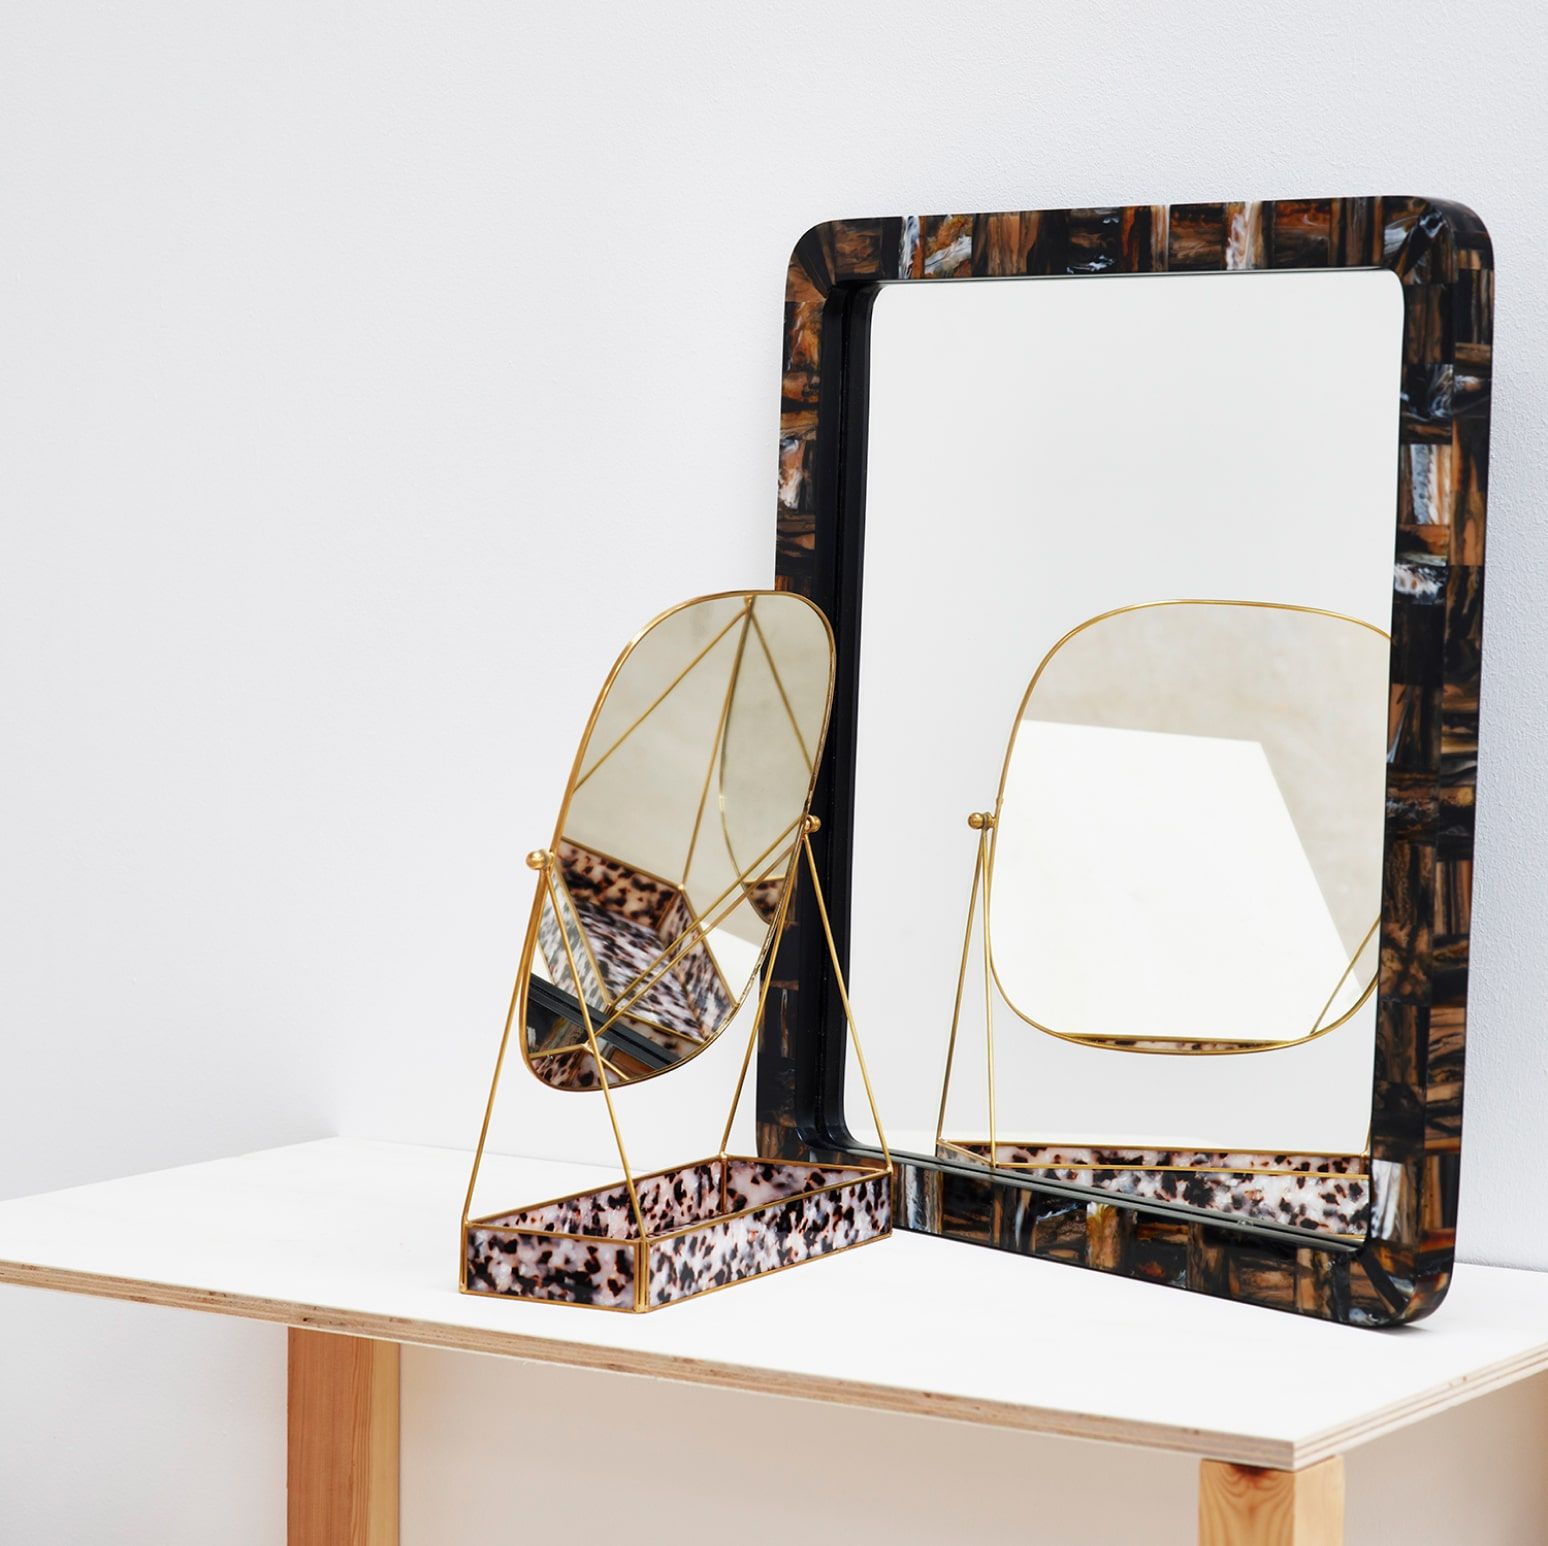 Expert Tips for Decorating with Mirrors